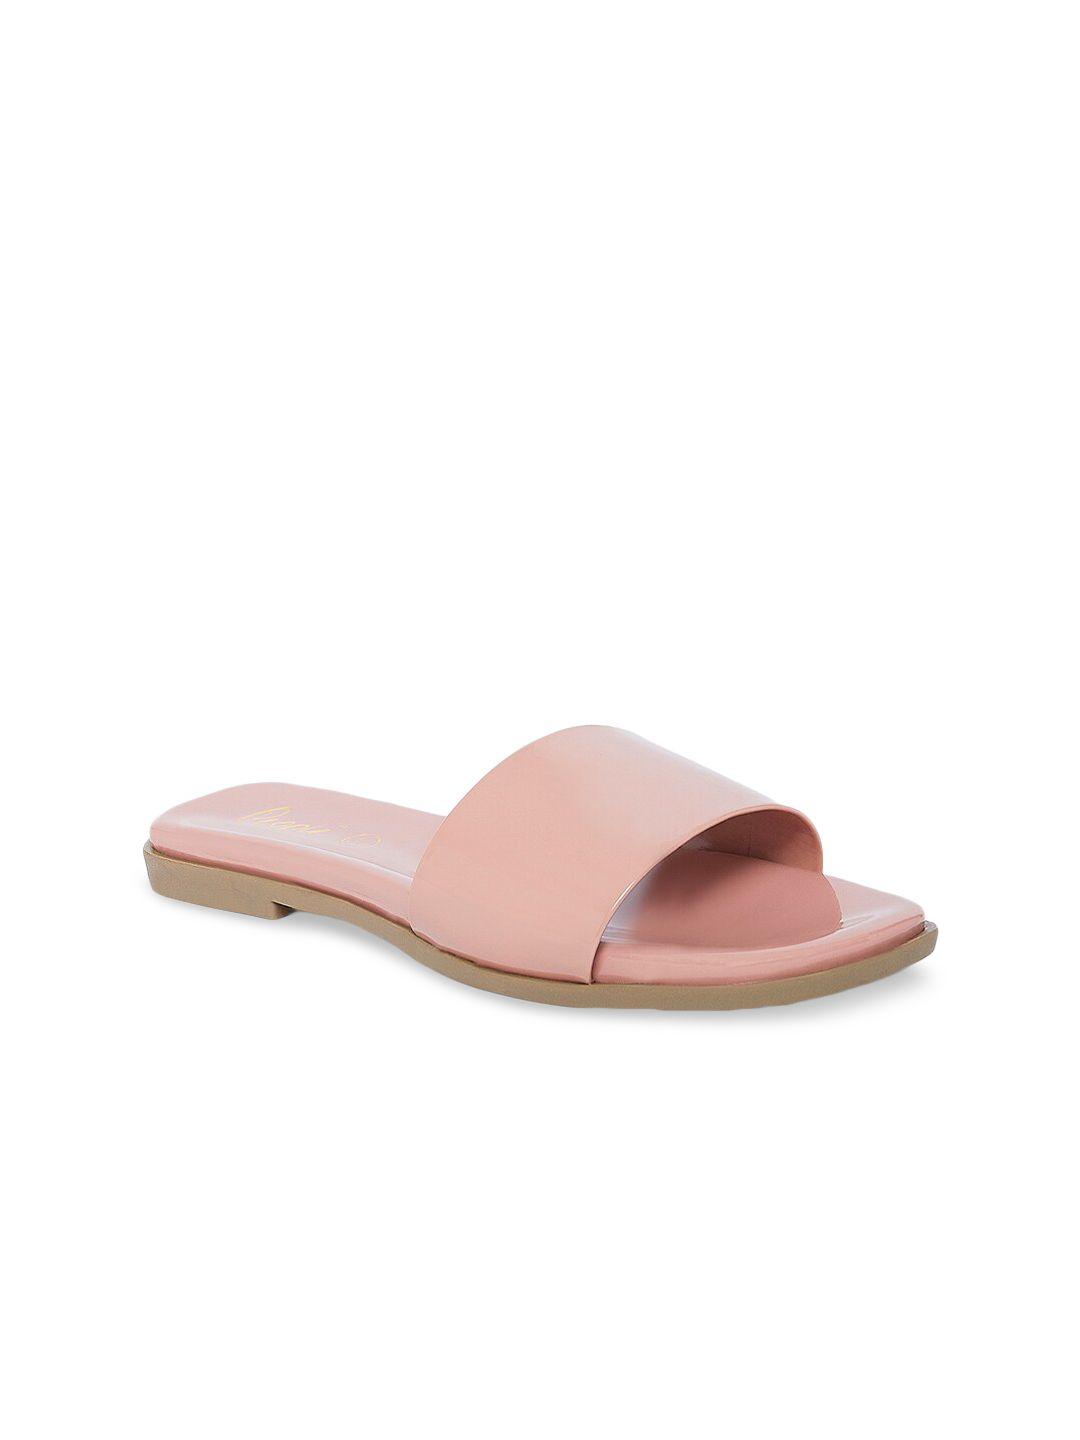 people women pink open toe flats with bows